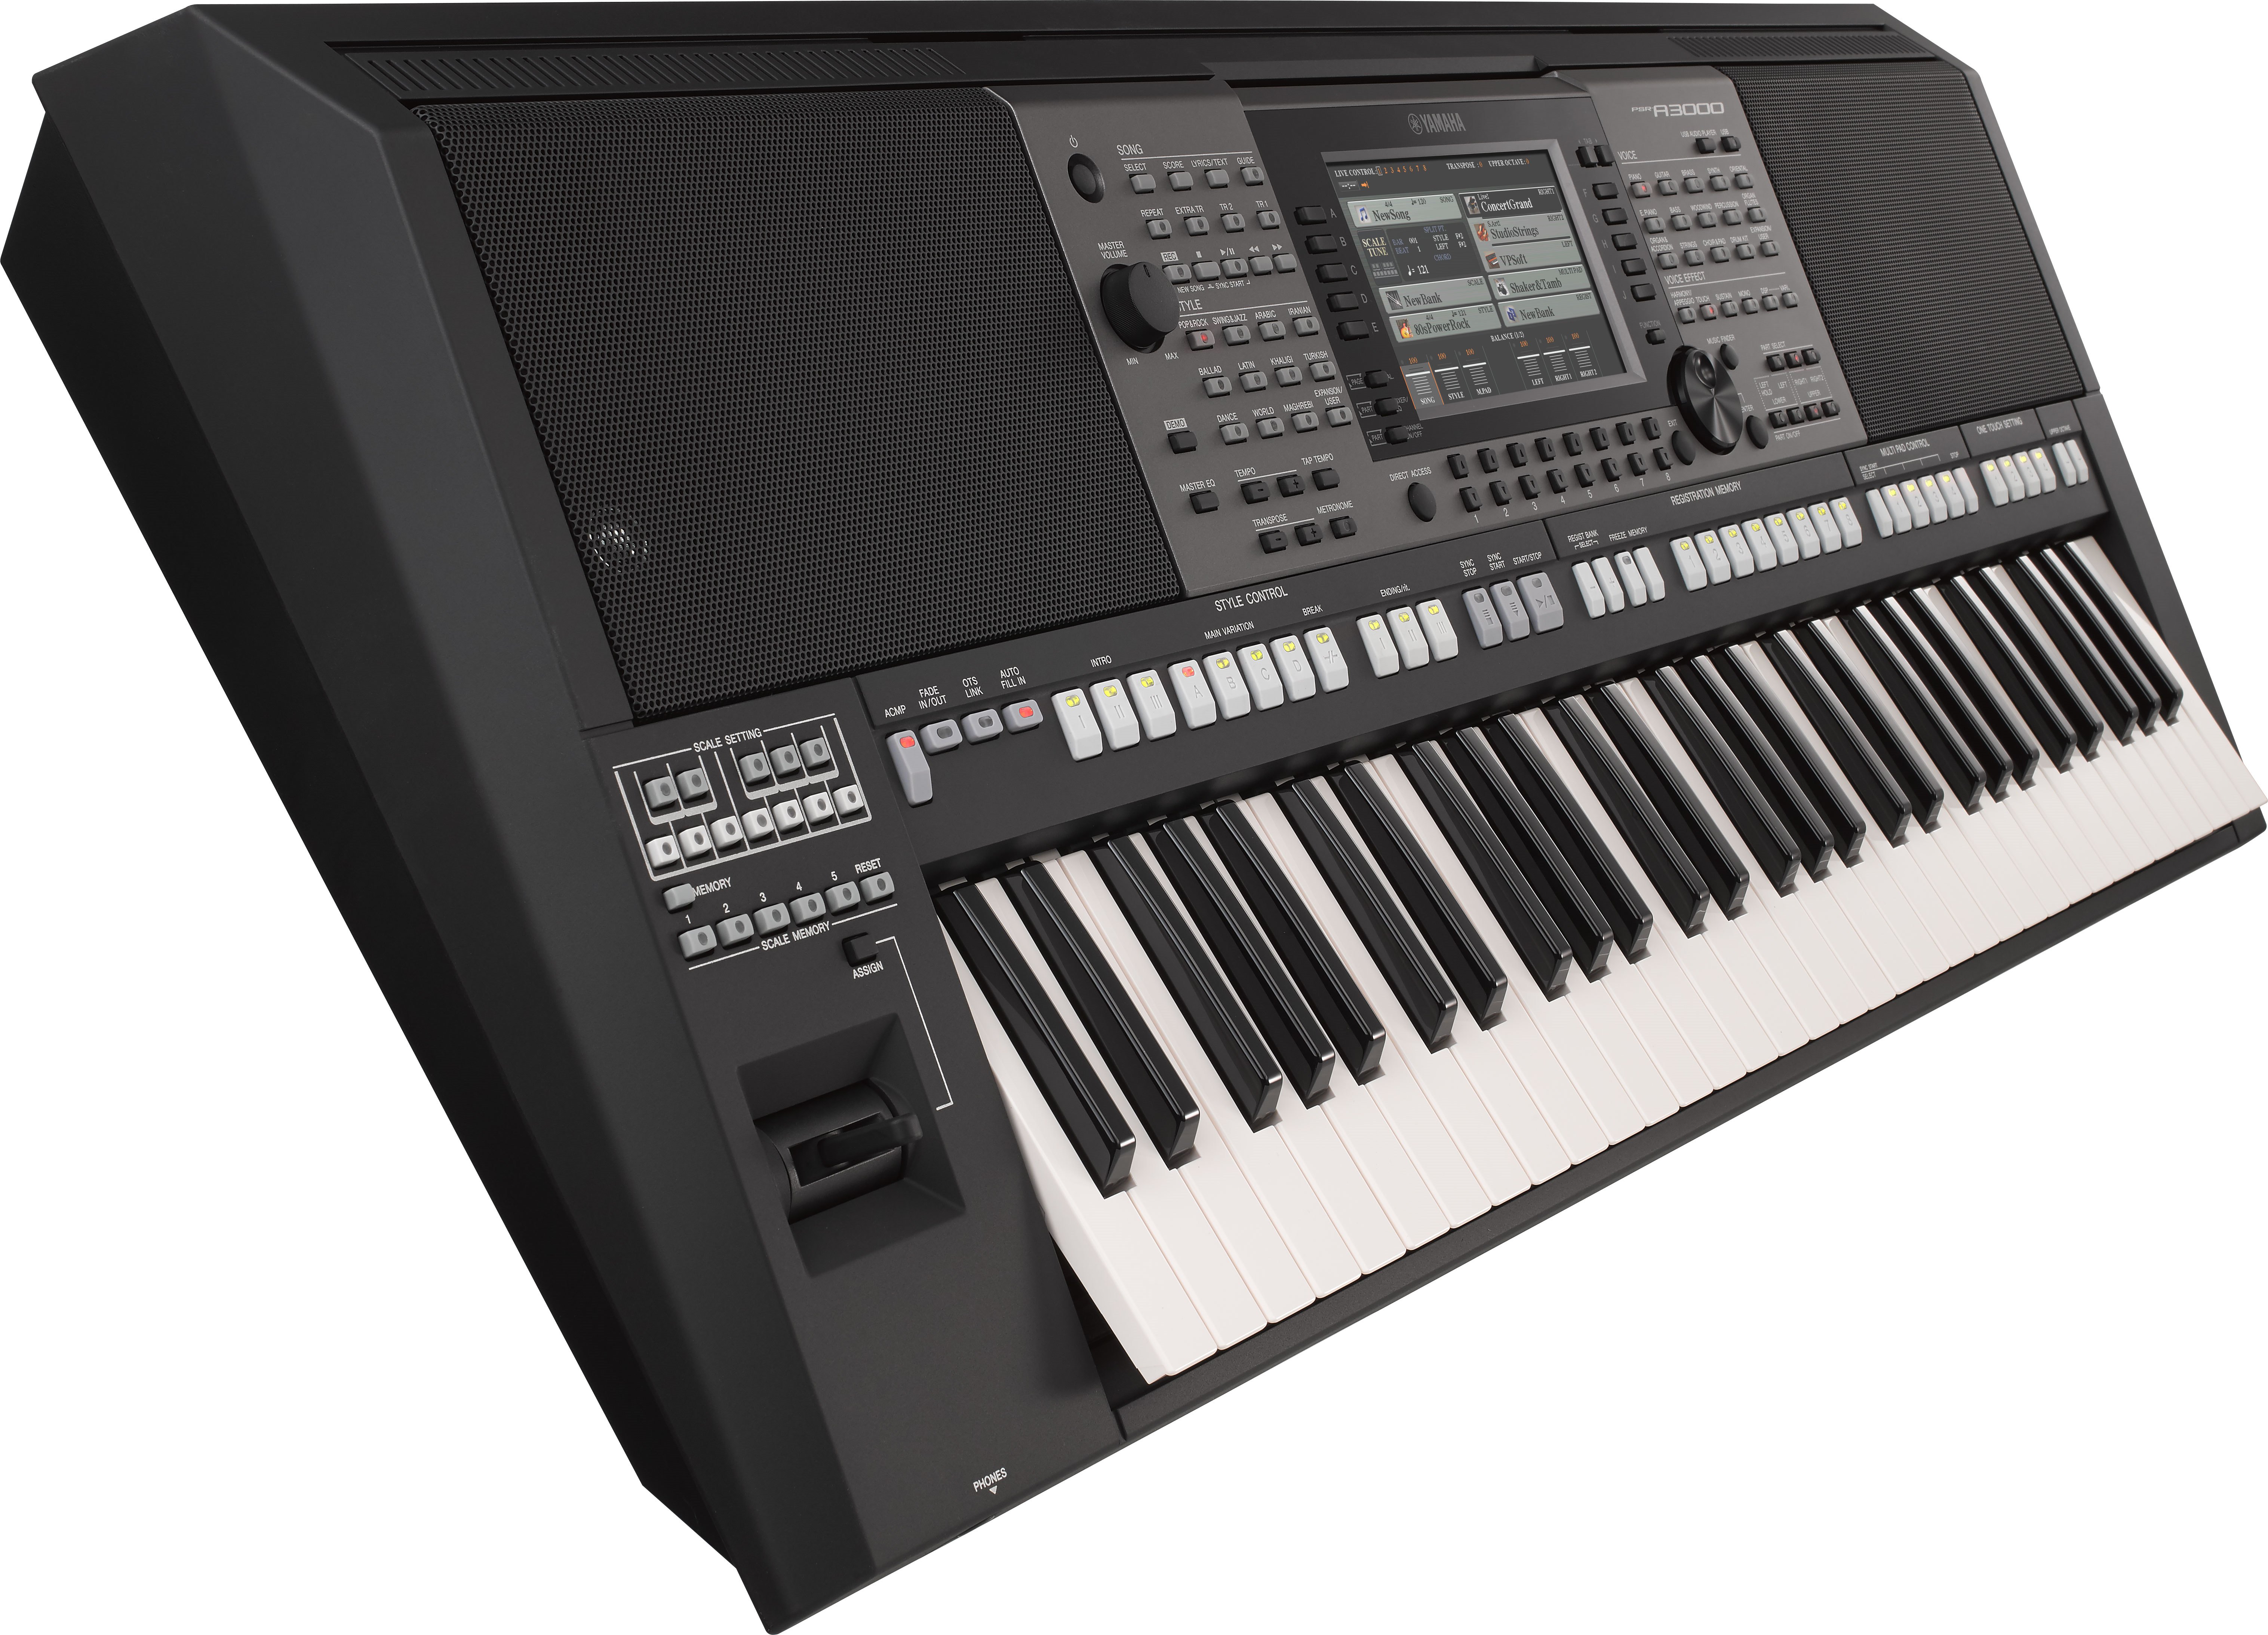 Glorioso La Iglesia anchura PSR-A3000 - Overview - Digital and Arranger Workstations - Keyboard  Instruments - Musical Instruments - Products - Yamaha USA